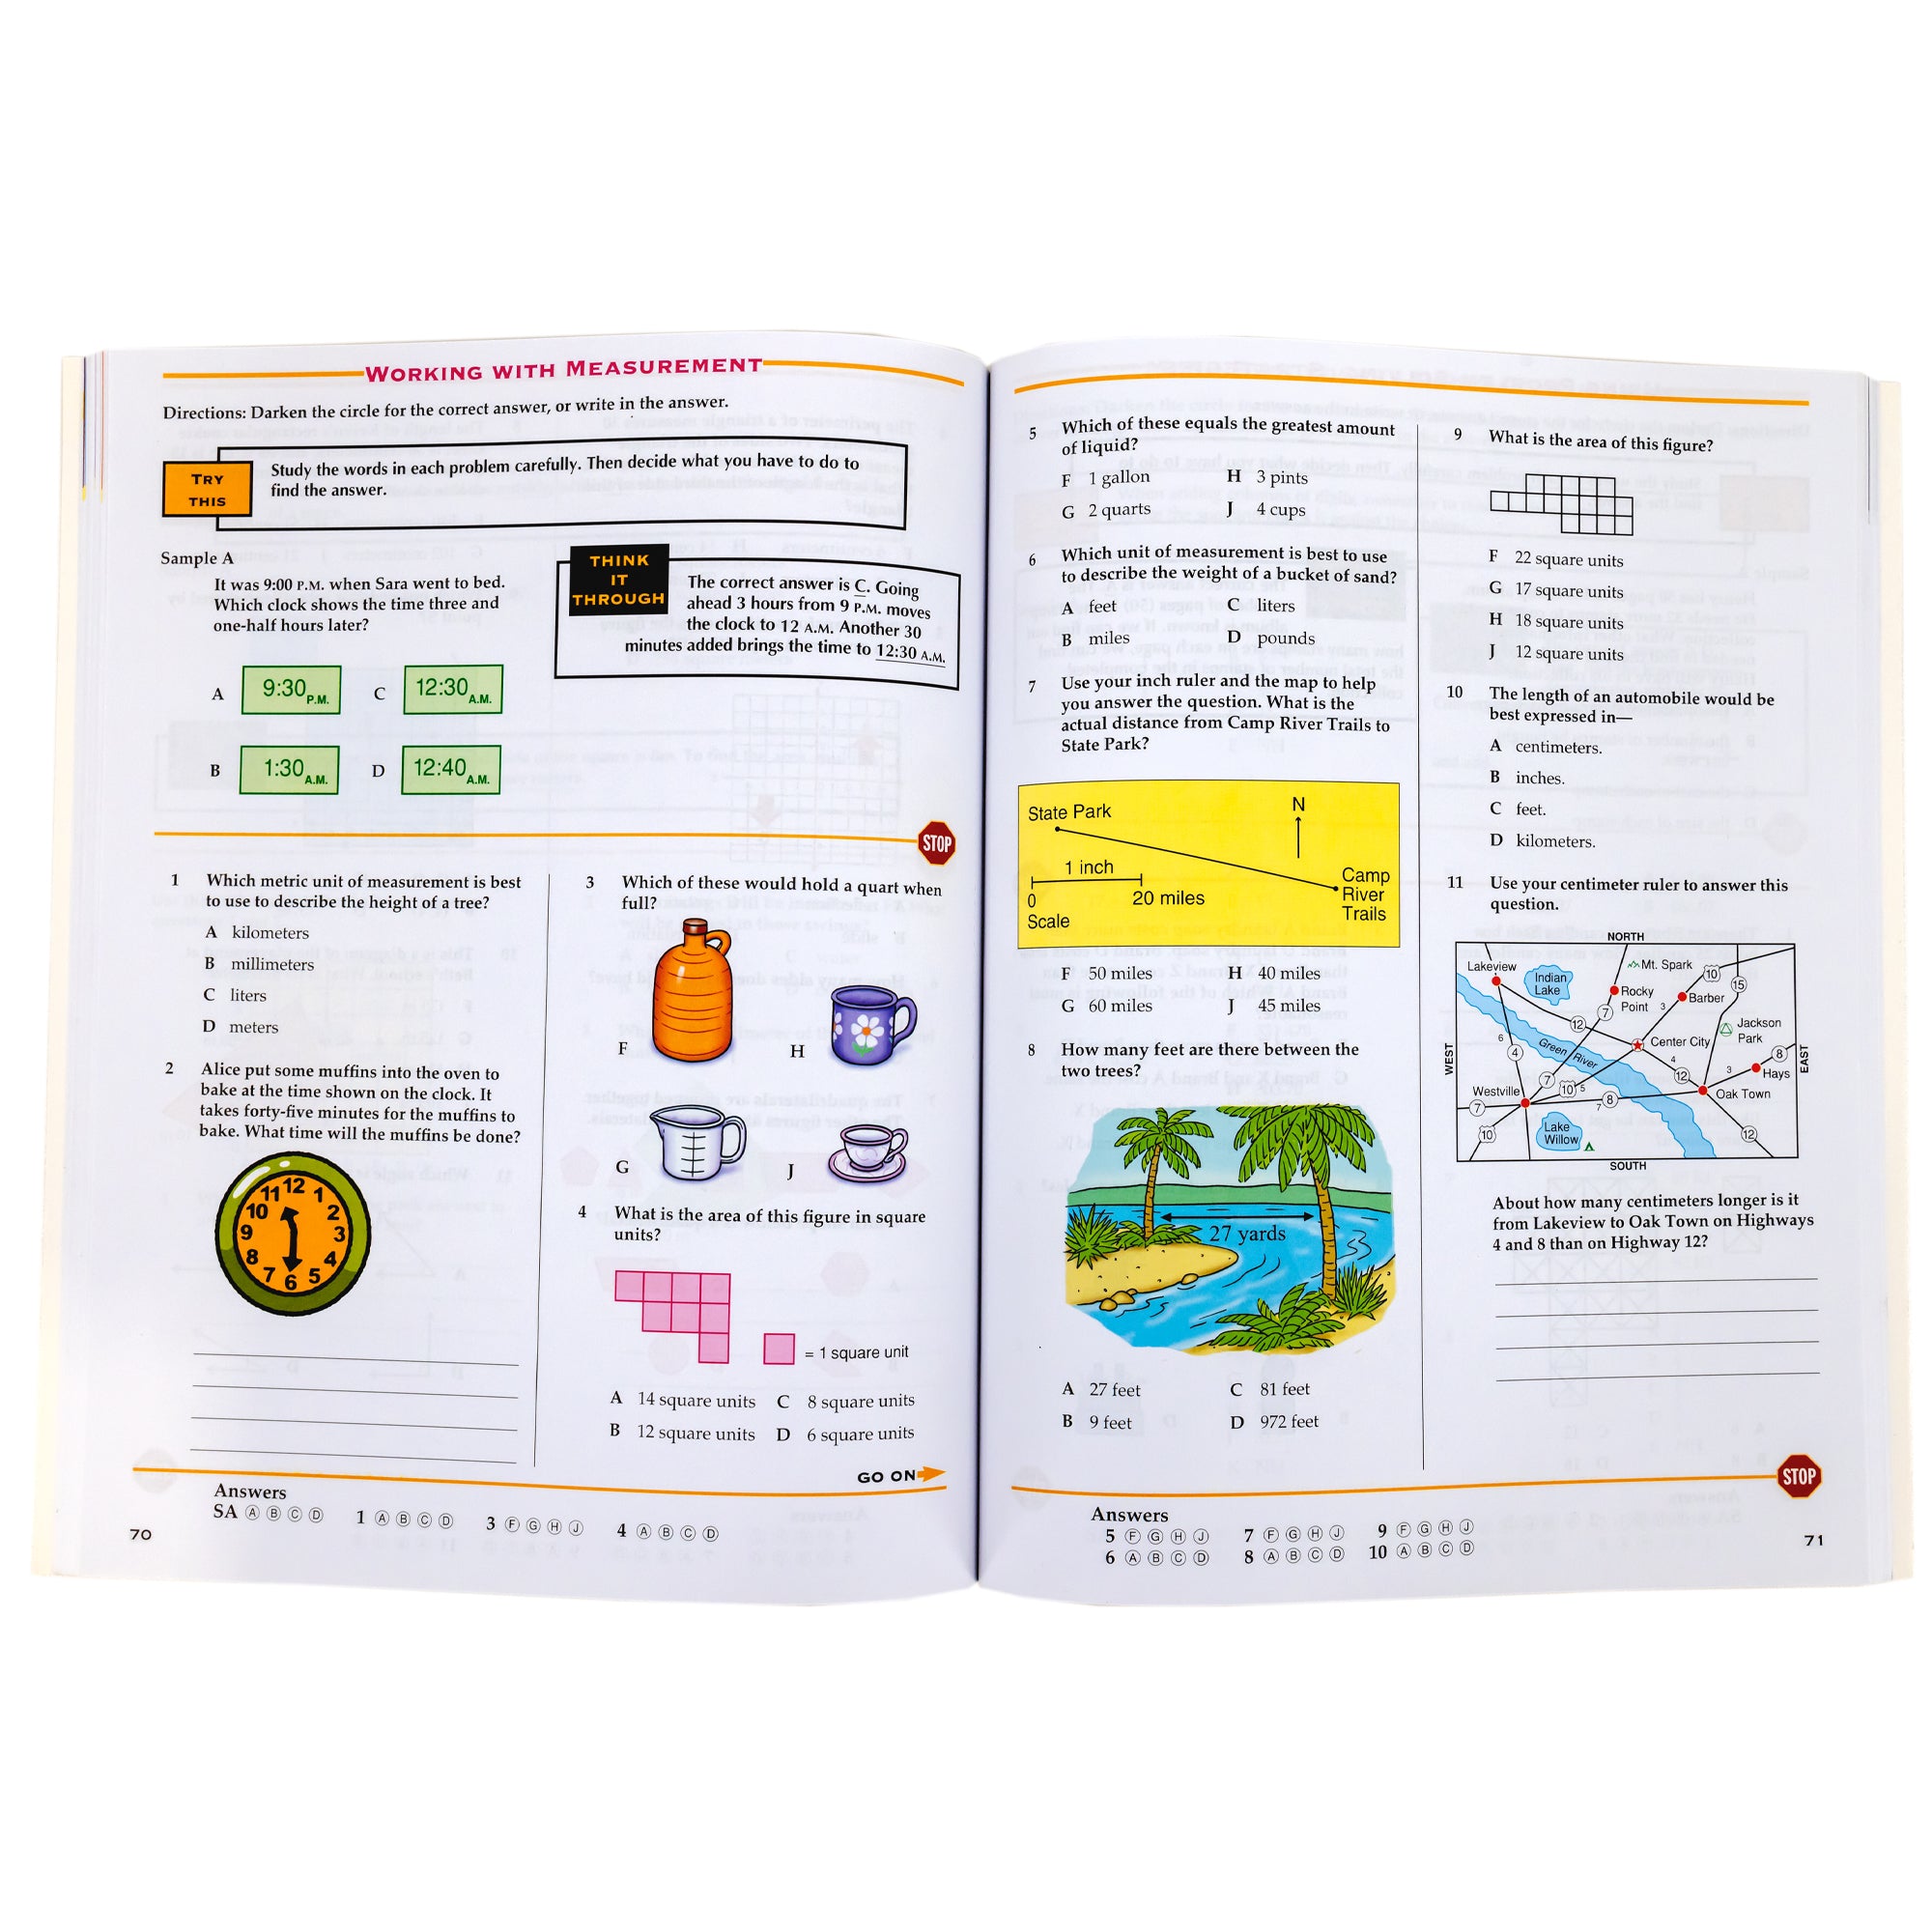 Test Prep Grade 5 book open to show inside pages. The left page has a sample question at the top, 3 multiple choice questions, and 1 sentence question. The right page has 6 multiple choice questions and 1 sentence question. There are several illustrations on both pages.